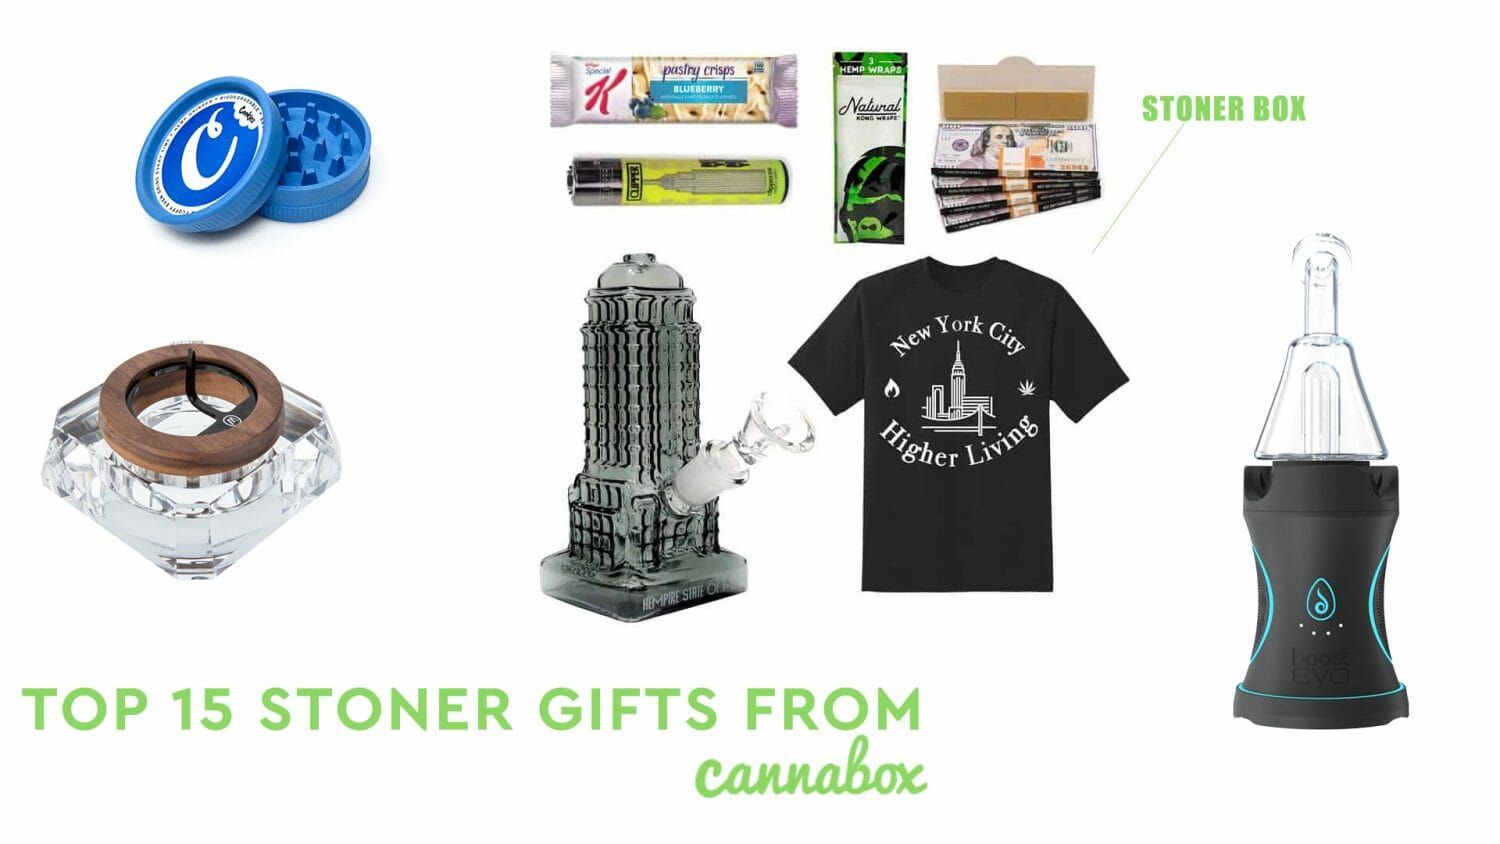 Top 15 Stoner Christmas Gifts For Him And Her